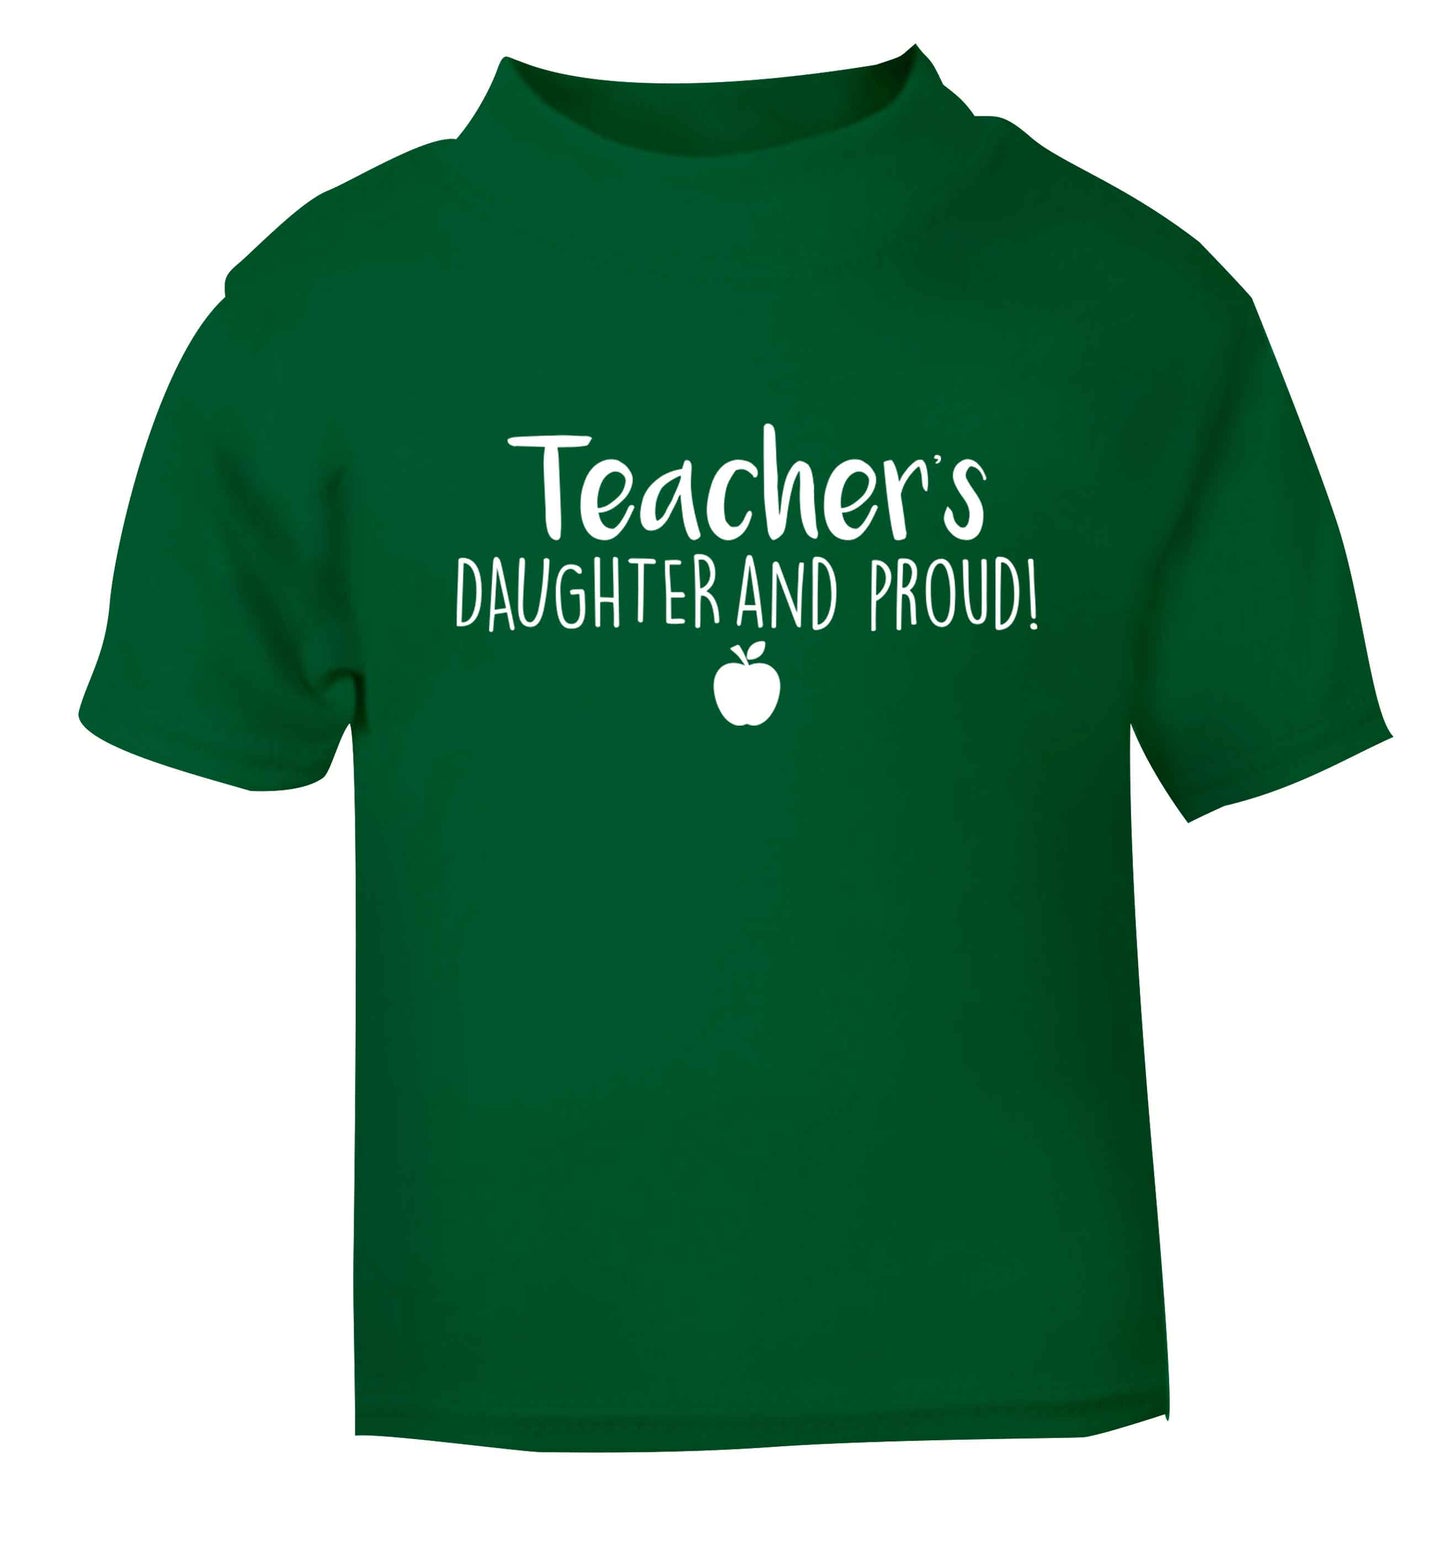 Teachers daughter and proud green baby toddler Tshirt 2 Years